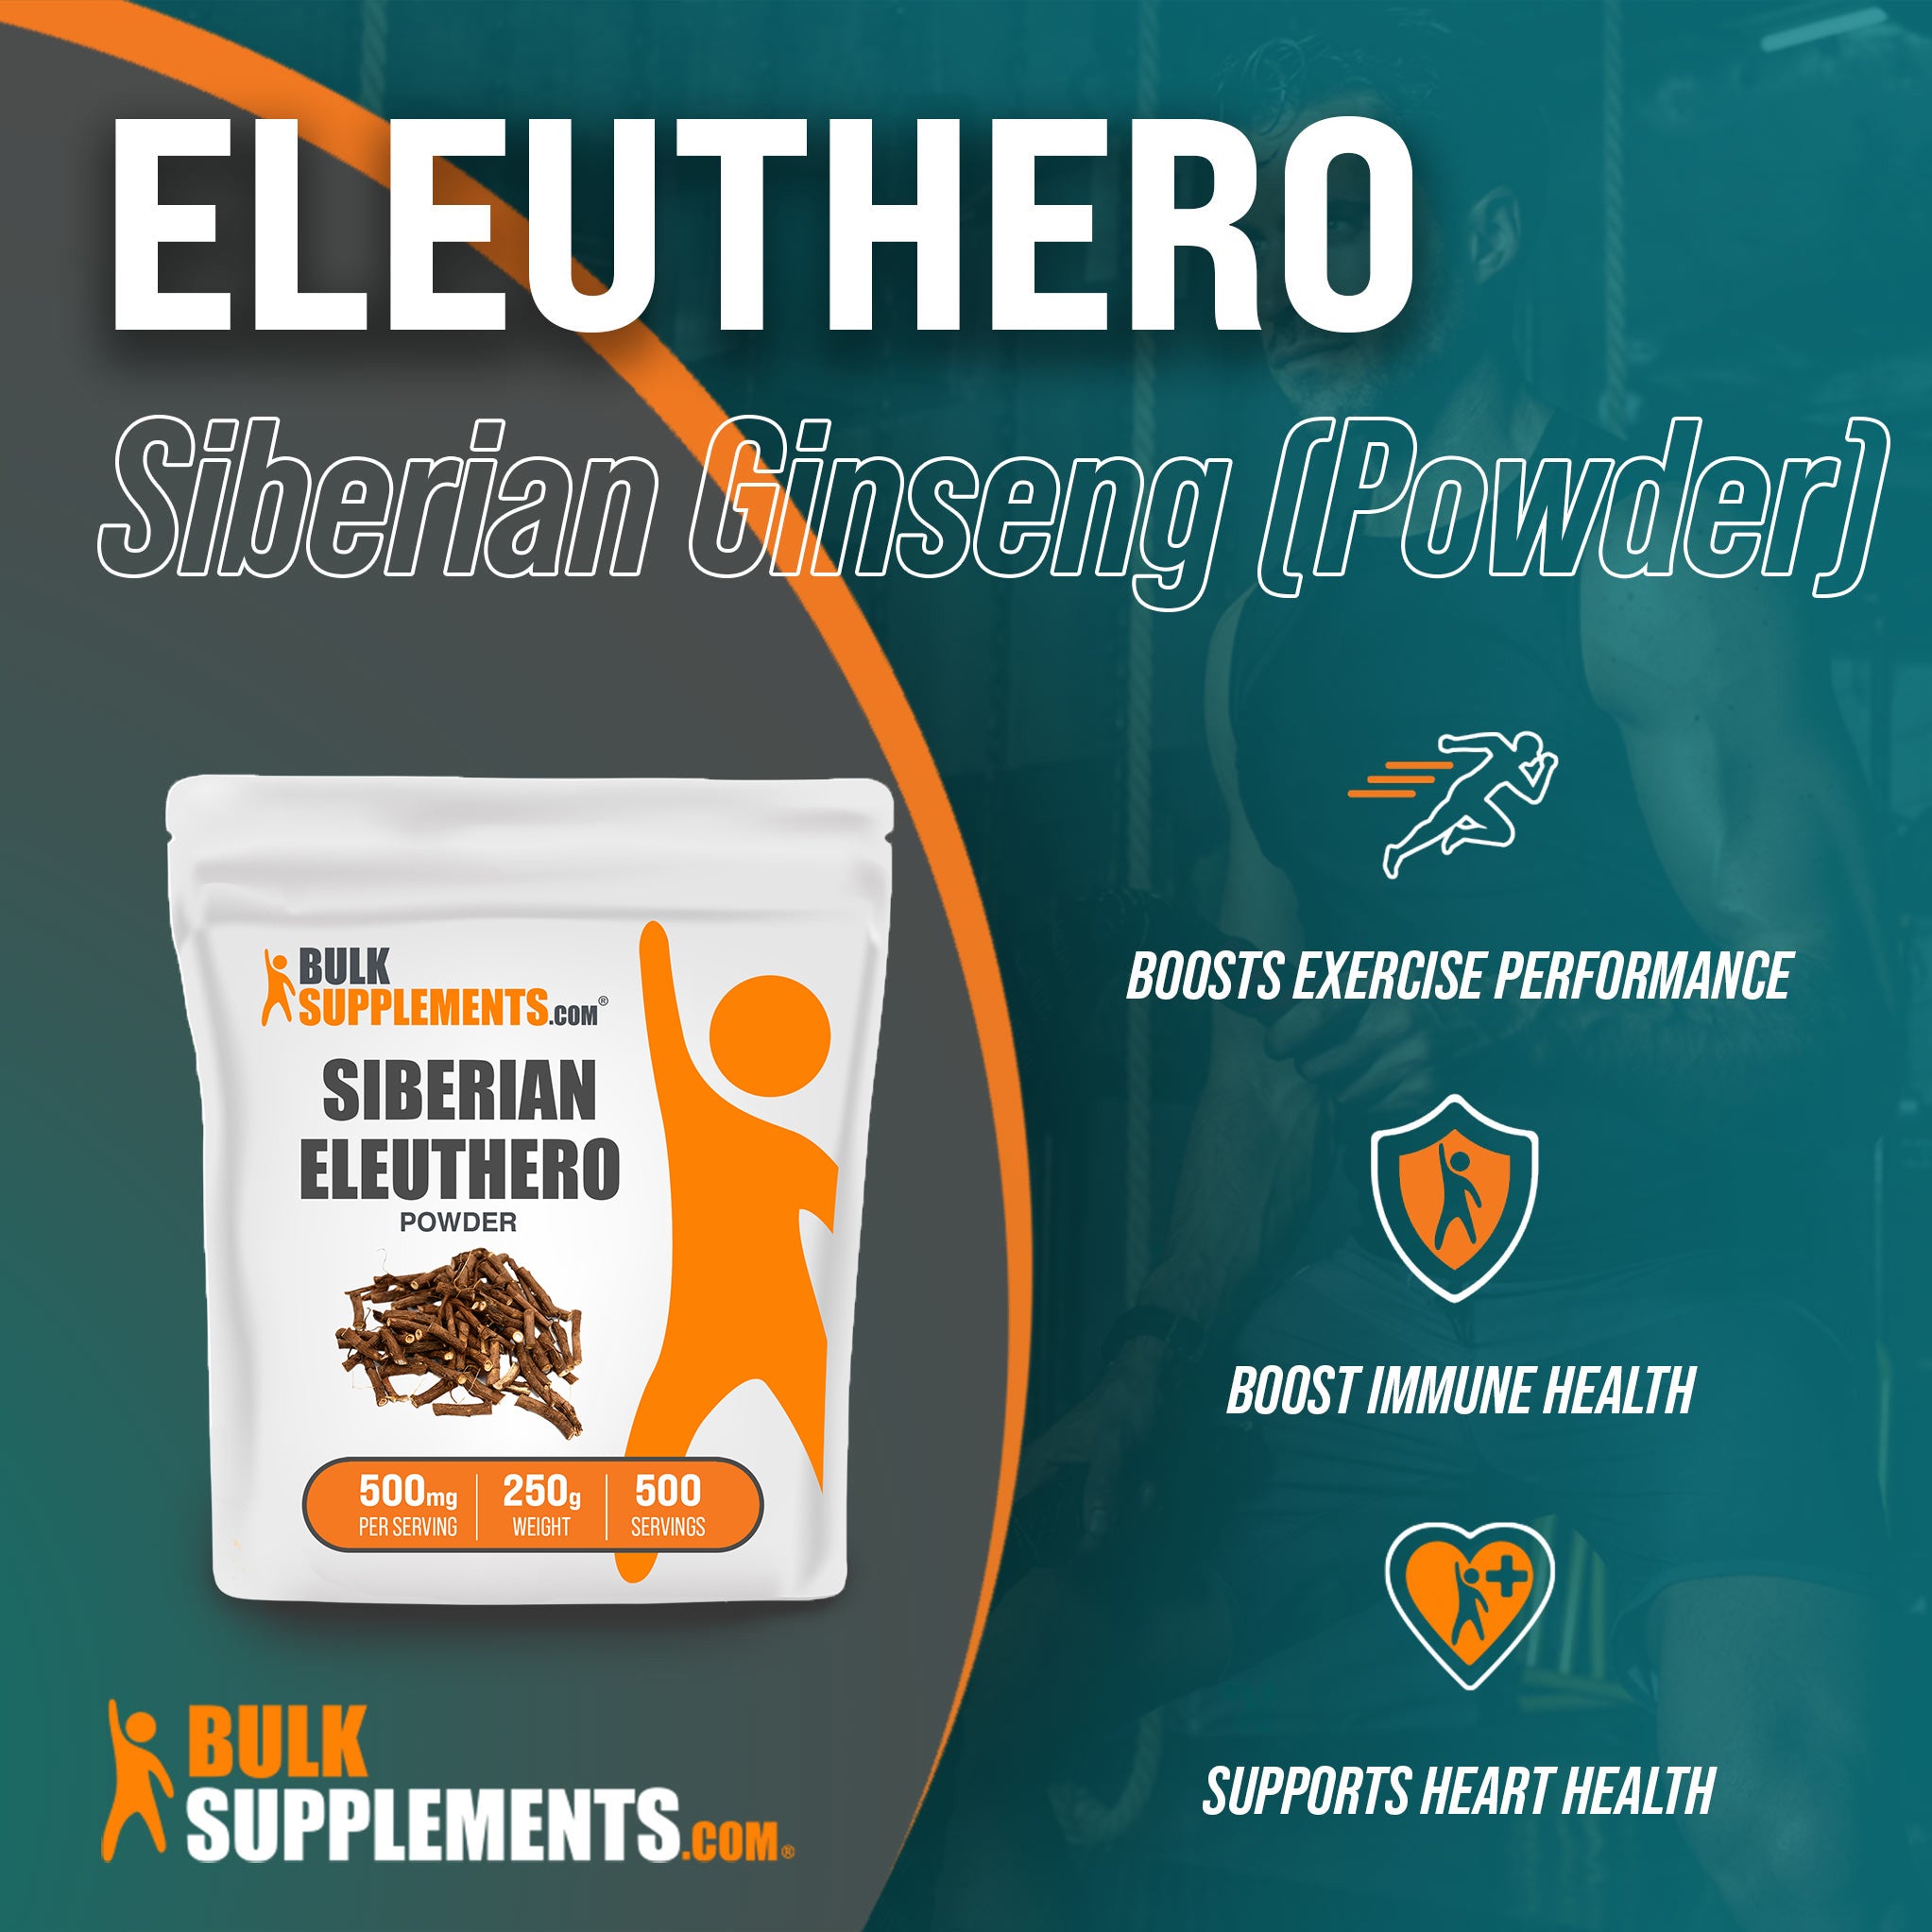 Benefits of Eleuthero Siberian Ginseng; boosts exercise performance, boost immune health, supports heart health